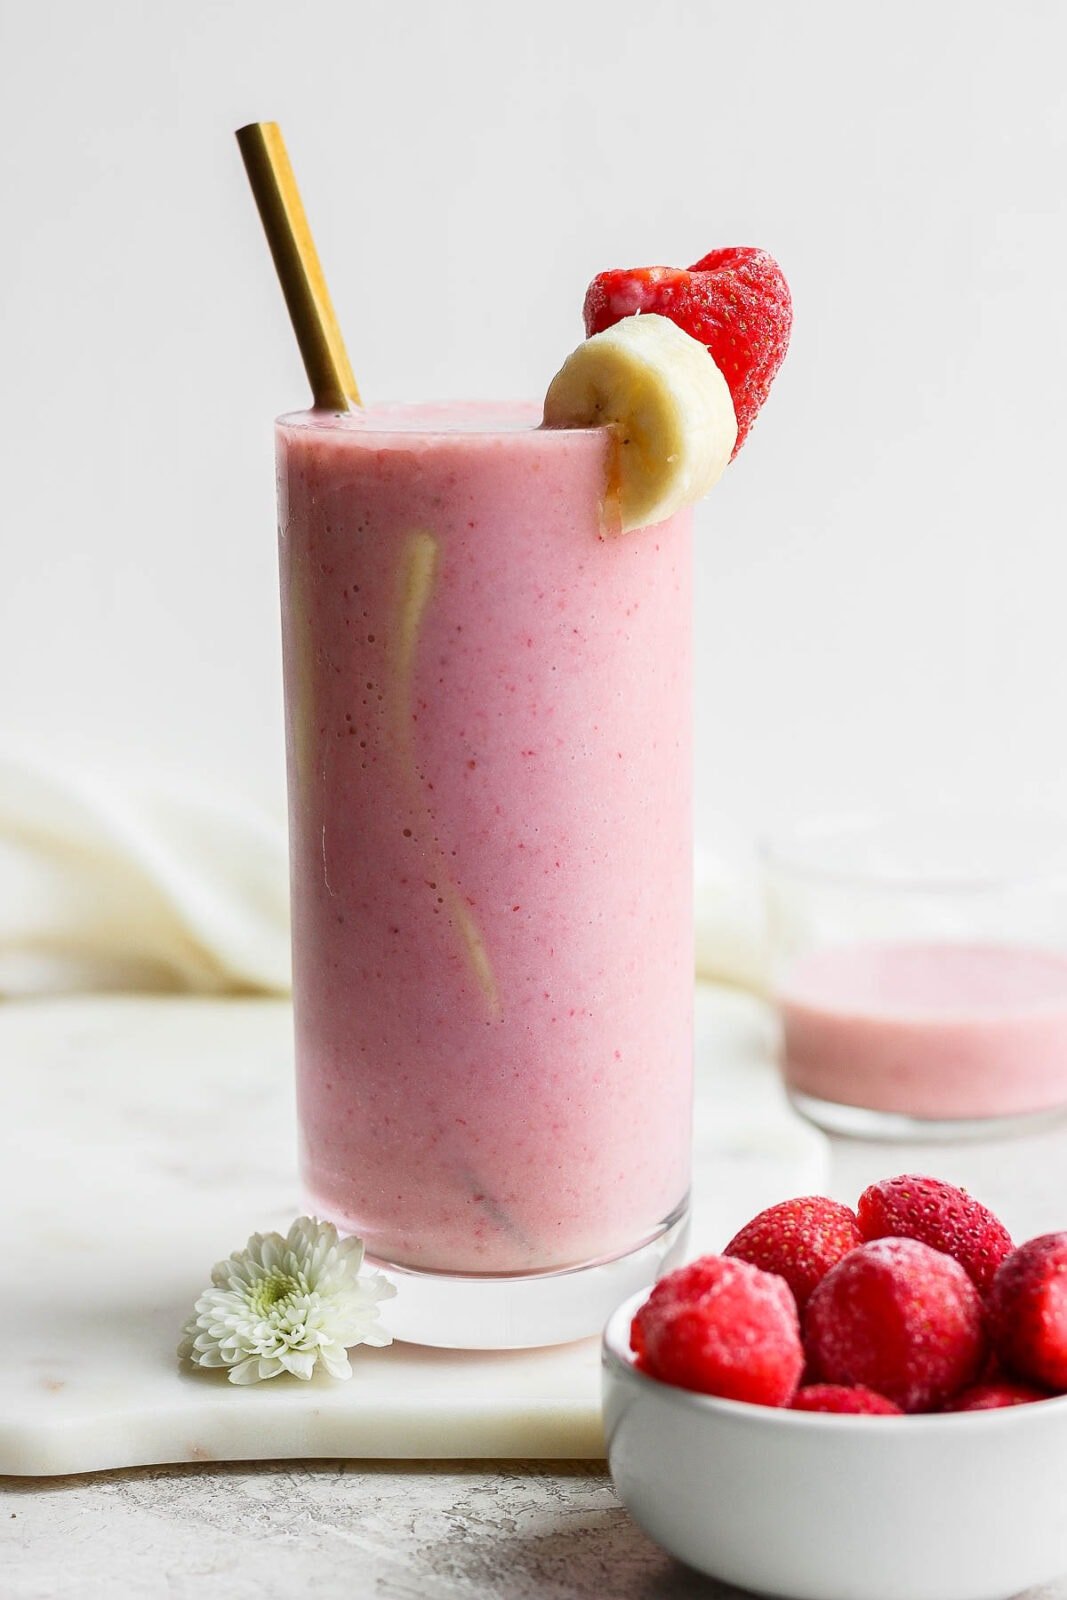 A strawberry banana smoothie in a glass.